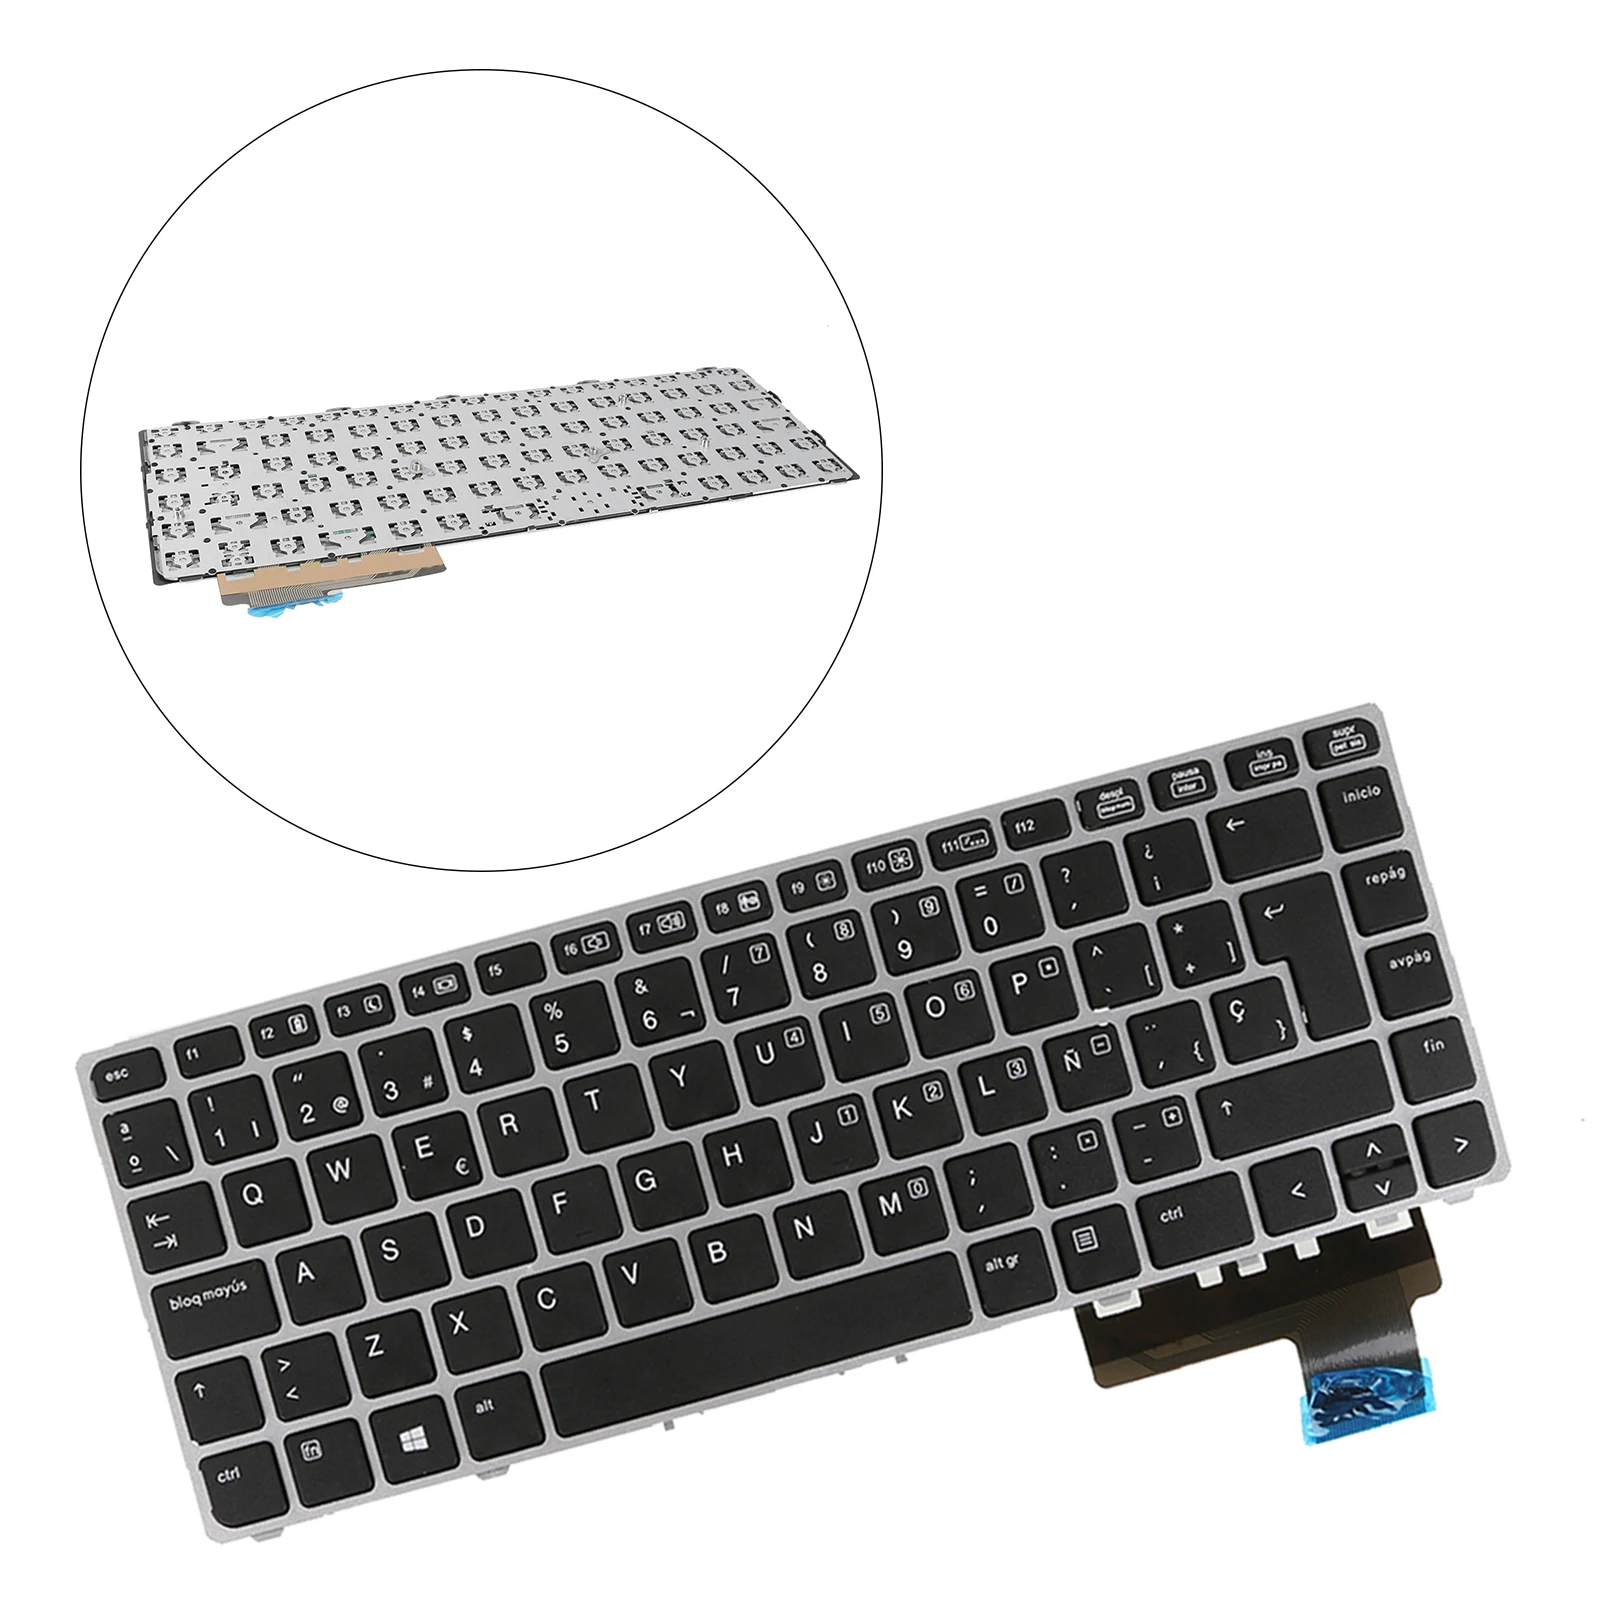 Keyboard Replaces for HP EliteBook Folio 9470M 9480M 702843-001, Professional Accessories